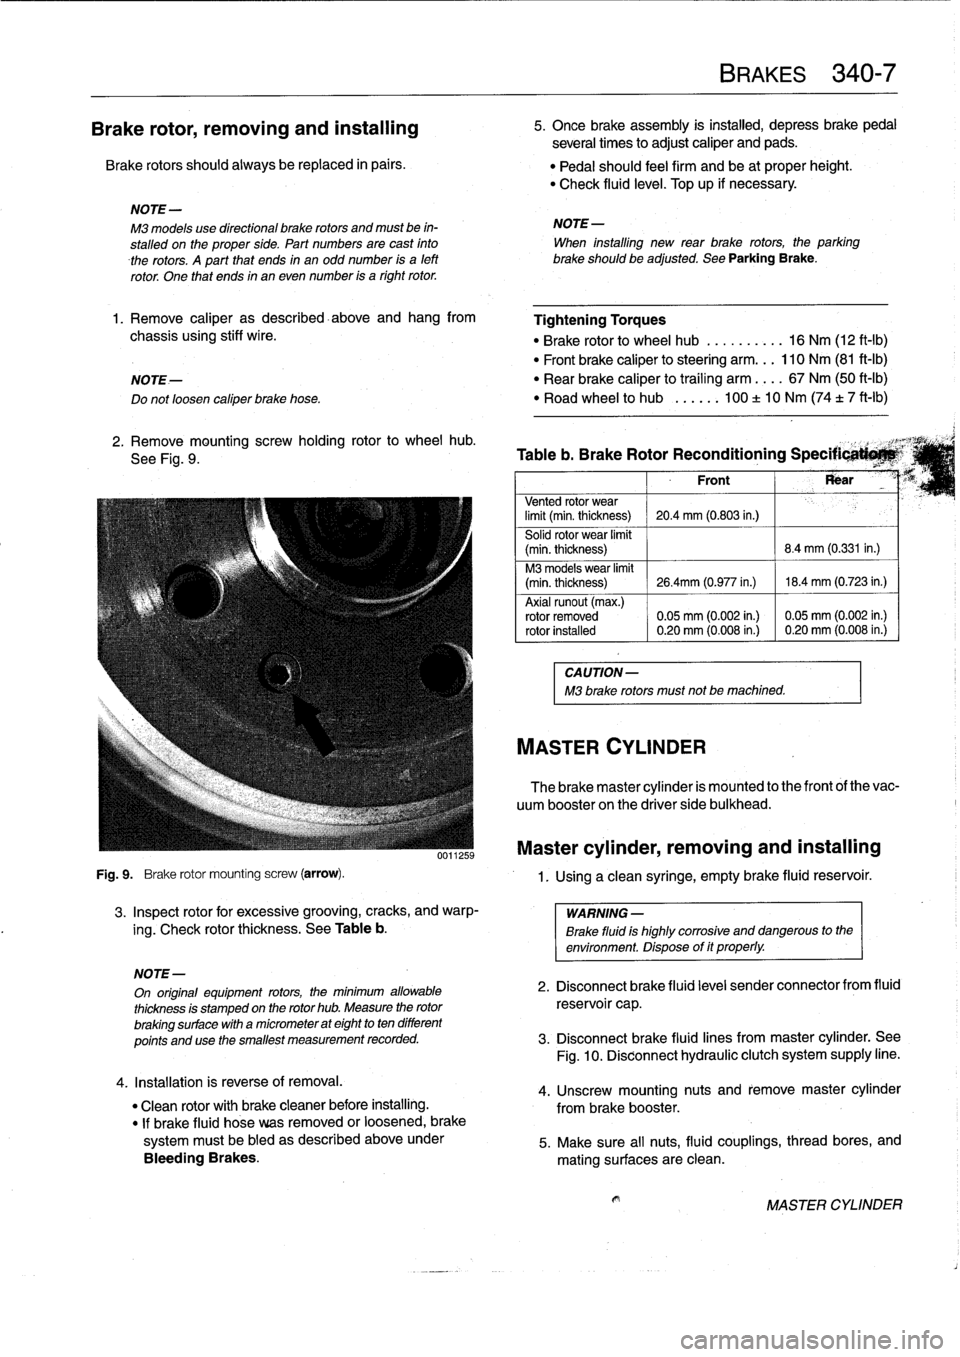 BMW 328i 1994 E36 Owners Guide 
Brake
rotor,
removing
and
installing

Brake
rotors
shouldalways
be
replaced
in
pairs
.

Fig
.
9
.

	

Brake
rotor
mounting
screw
(arrow)
.

3
.
Inspect
rotor
for
excessive
grooving,
cracks,
and
warp-